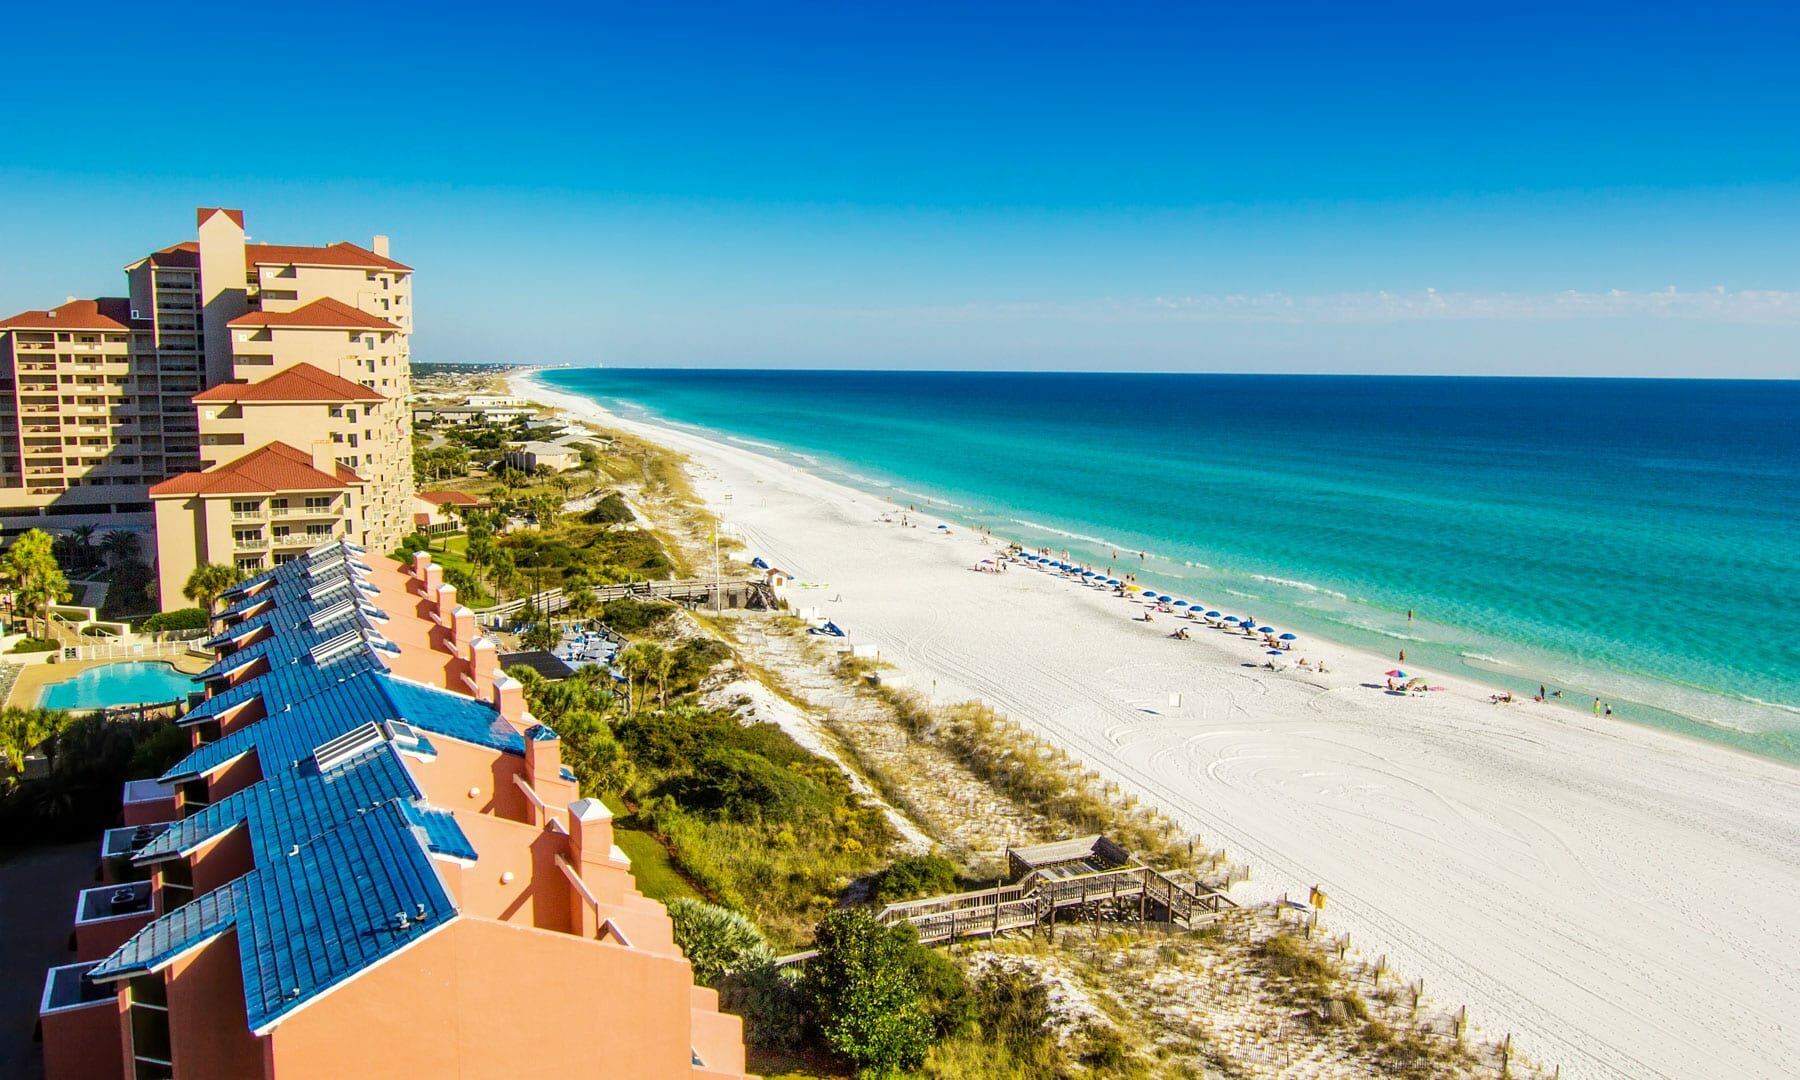 Panama City Beach  Find Hotels, Restaurants & Things to Do